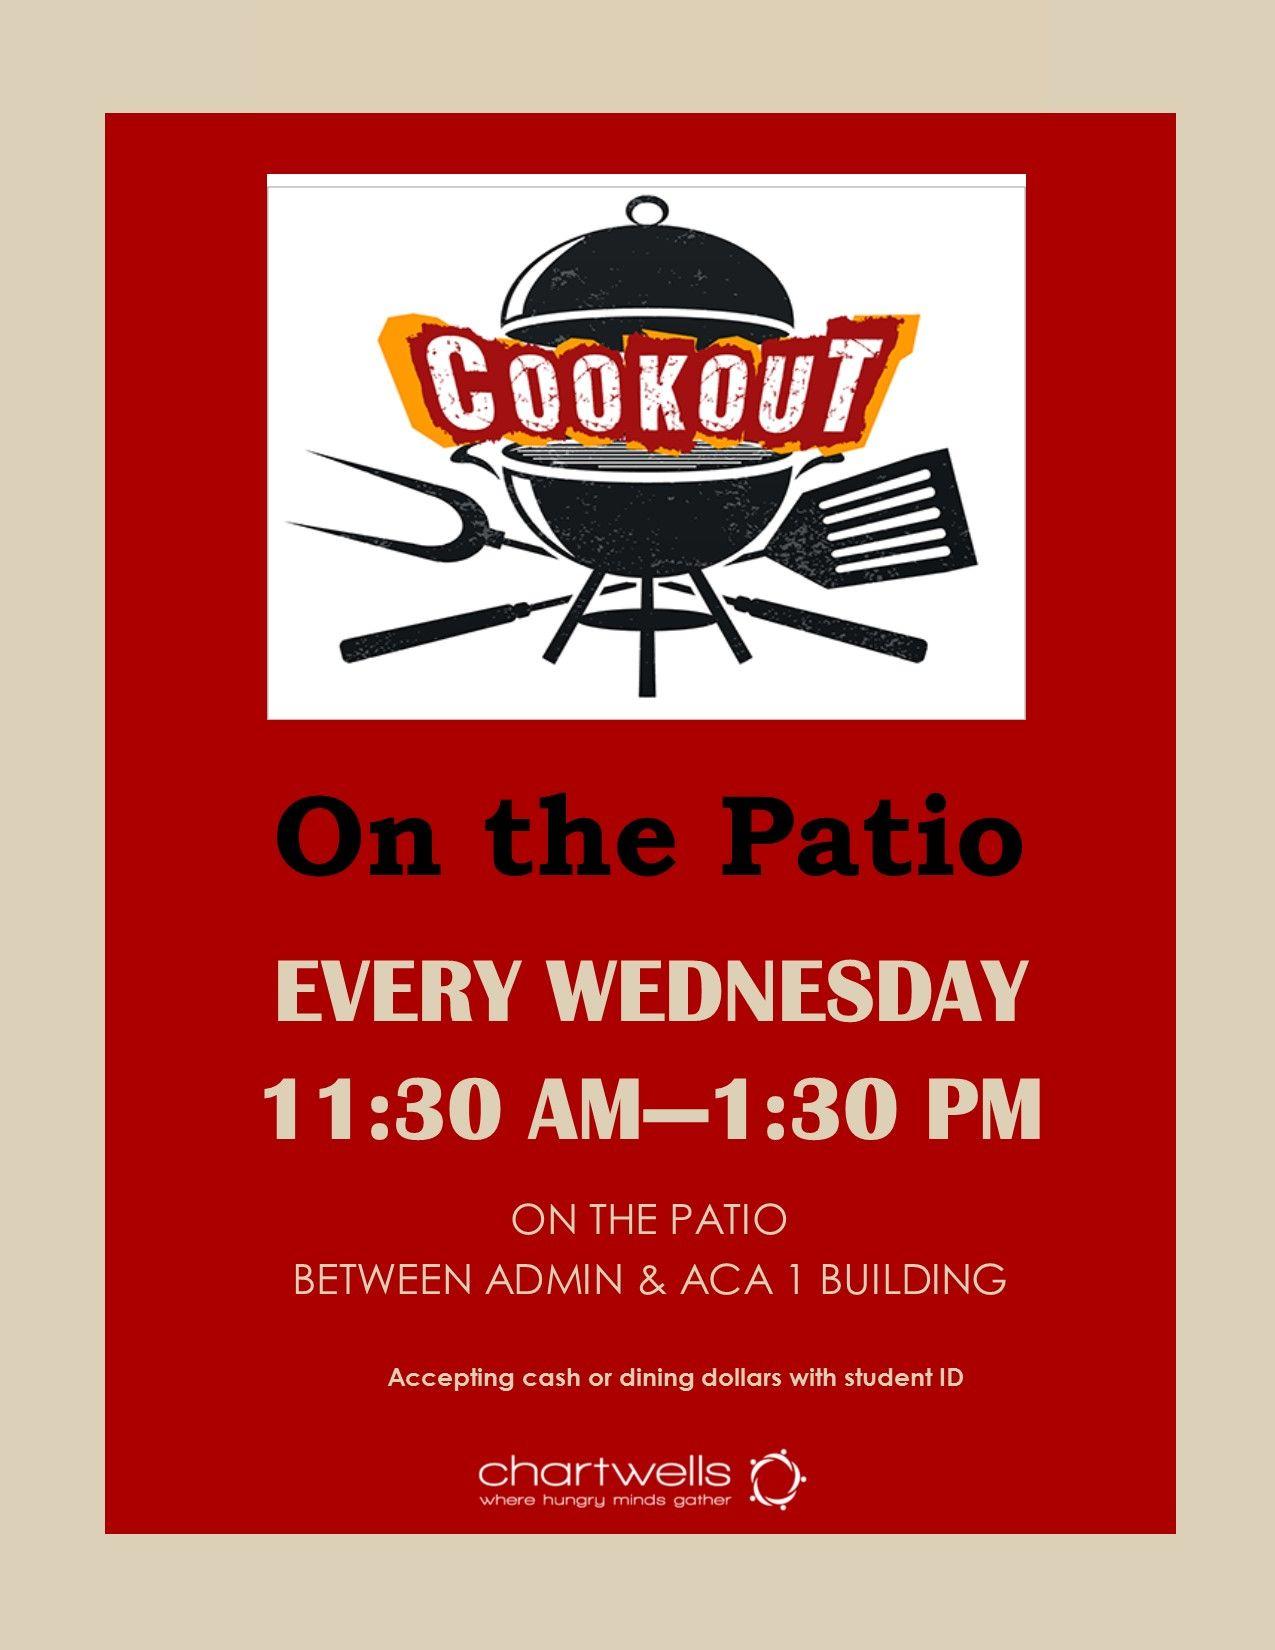 Cookout Logo - Dine On Campus at New York Chiropractic College.. Events